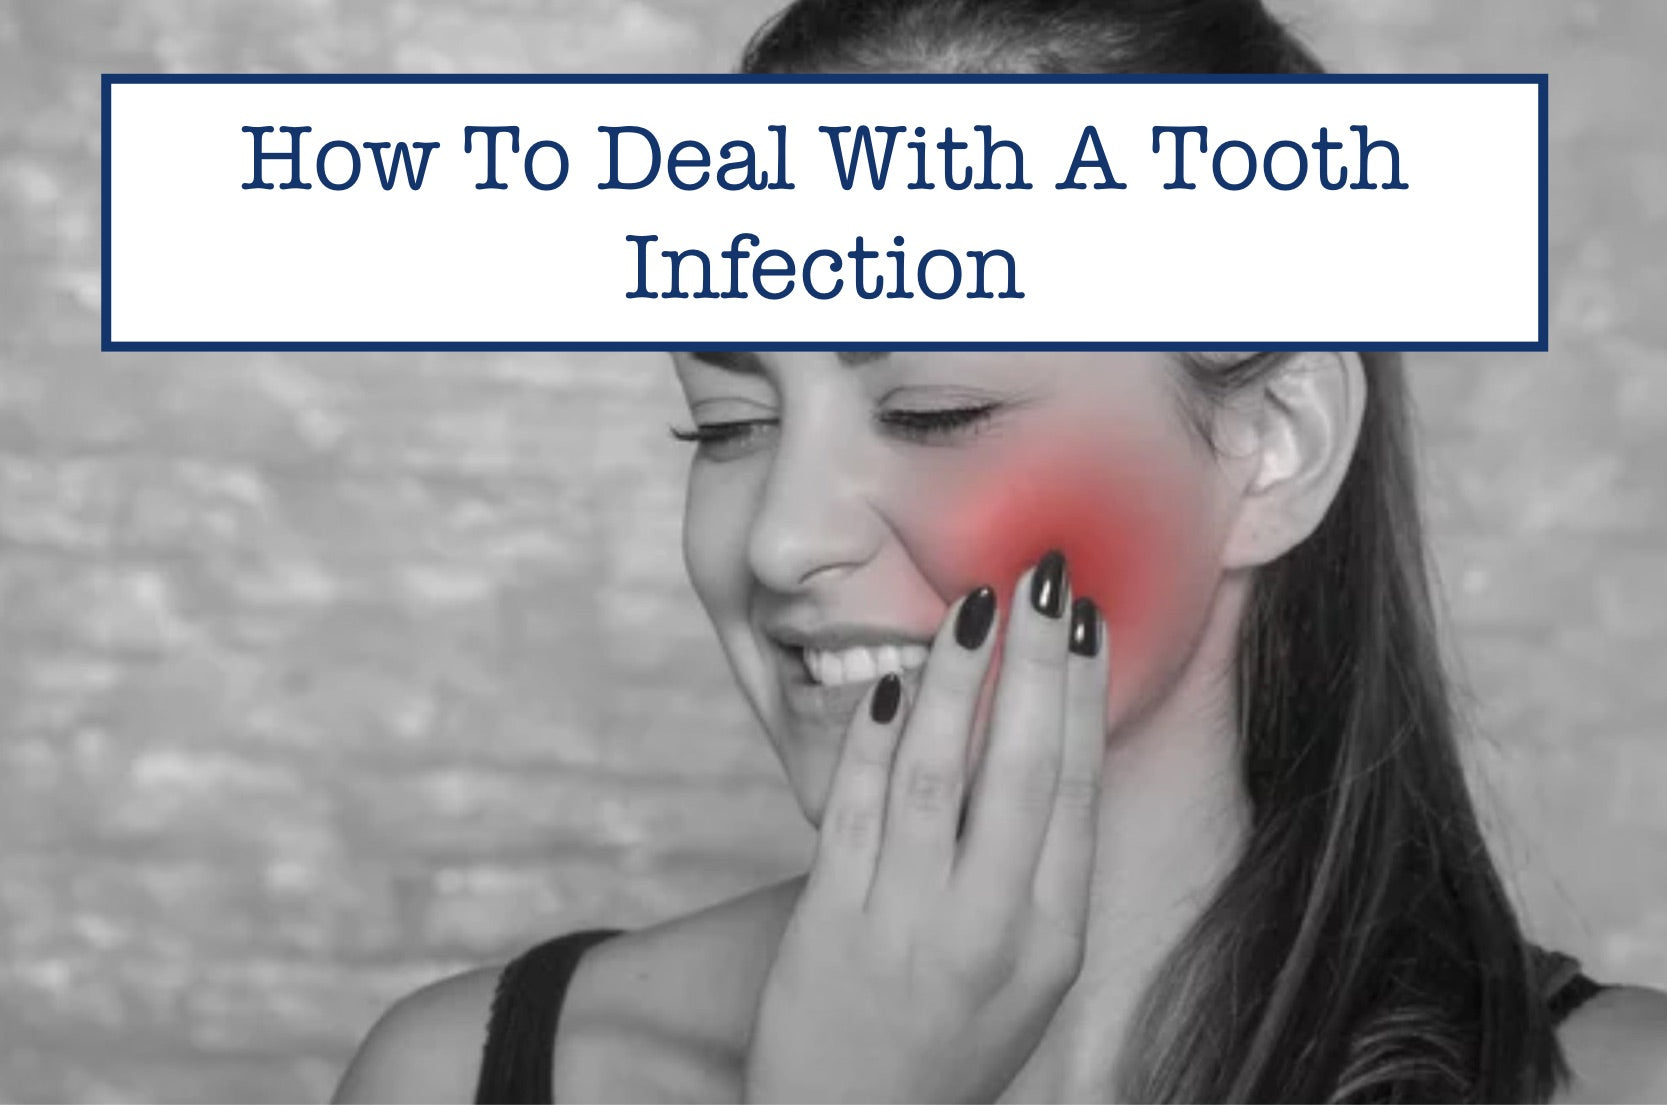 How To Deal With A Tooth Infection